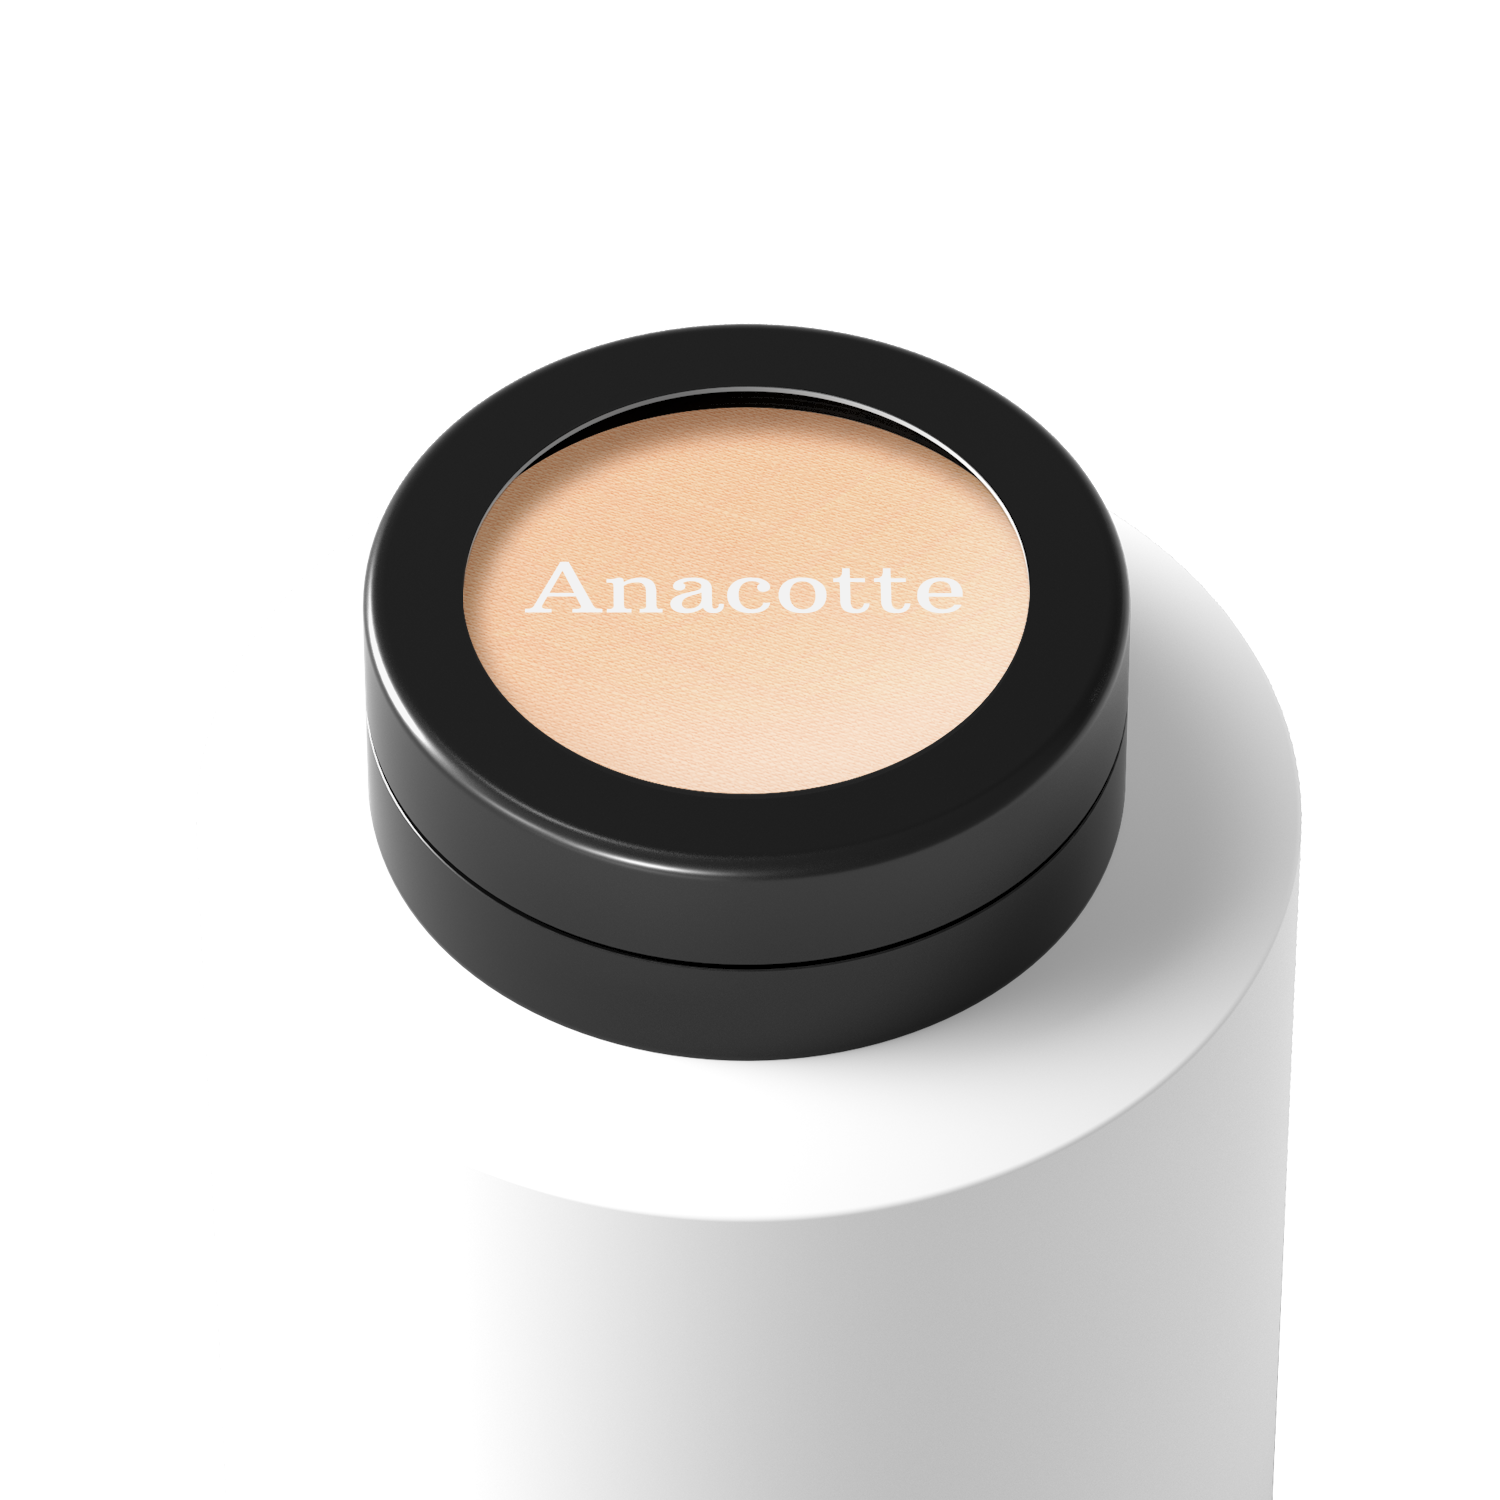 Anacotte Sheer and Talc-Free Blush for a Natural Glow